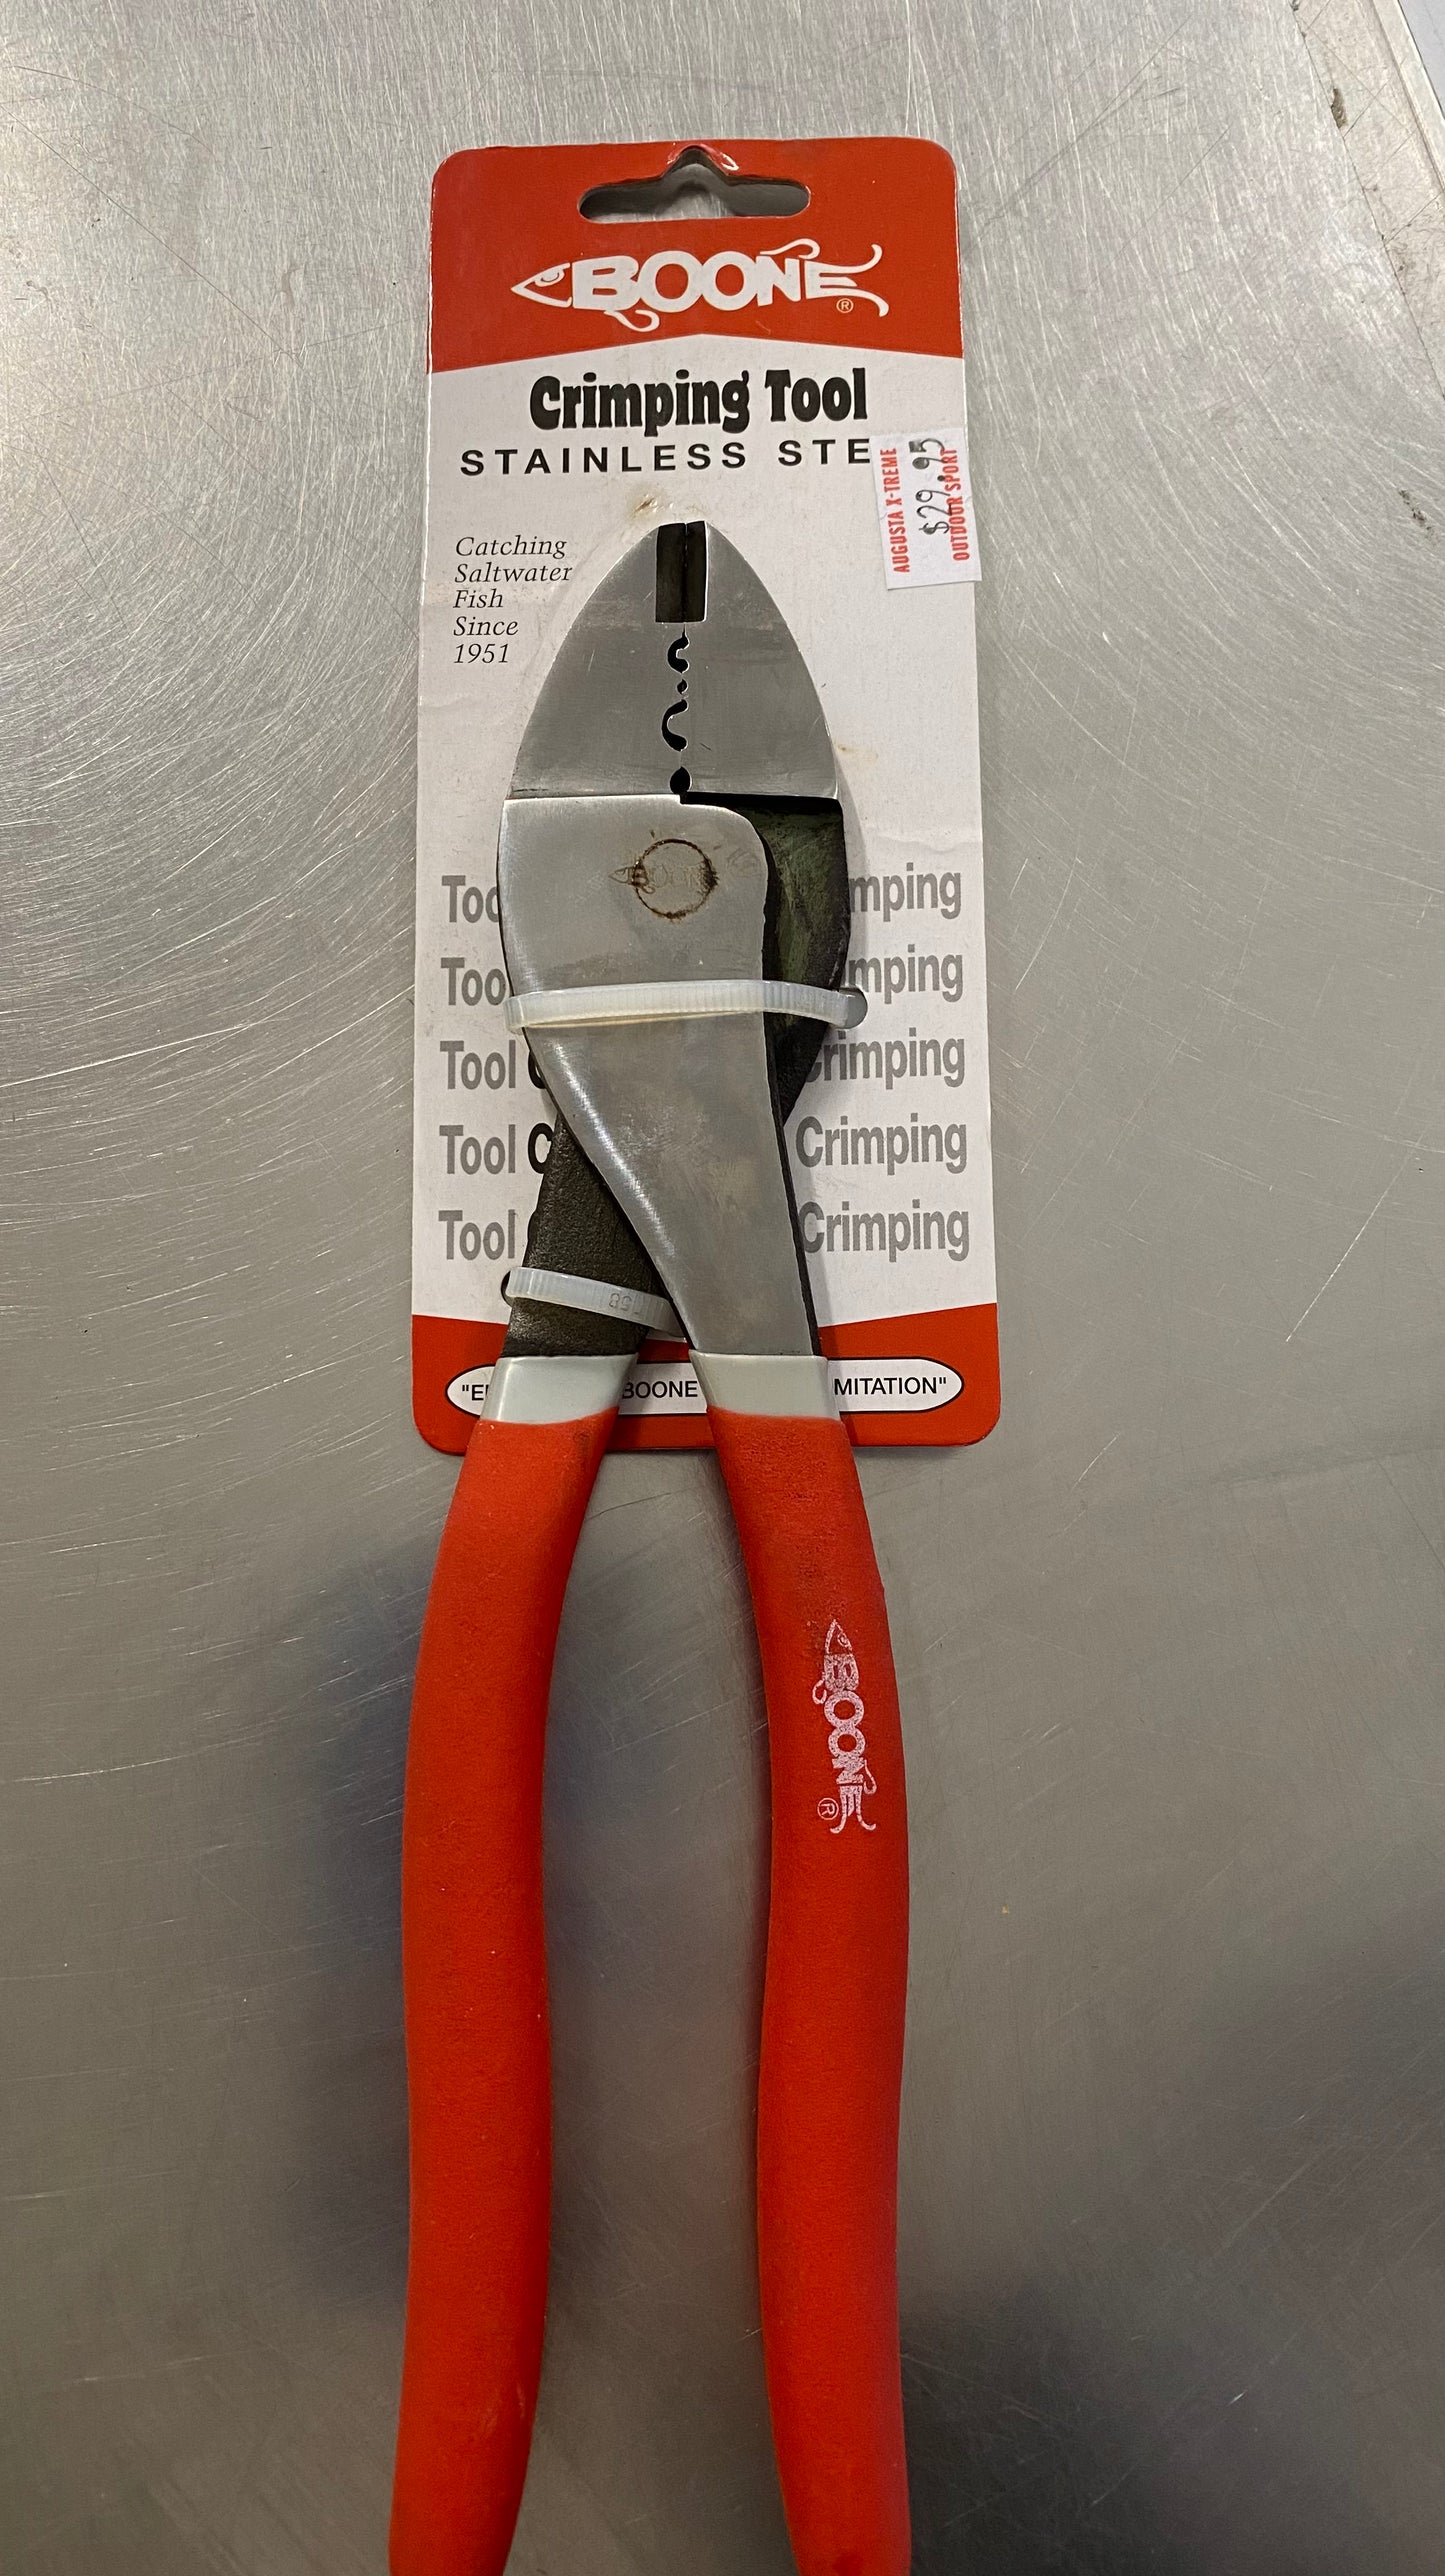 Boone Crimping Tool Stainless Steel